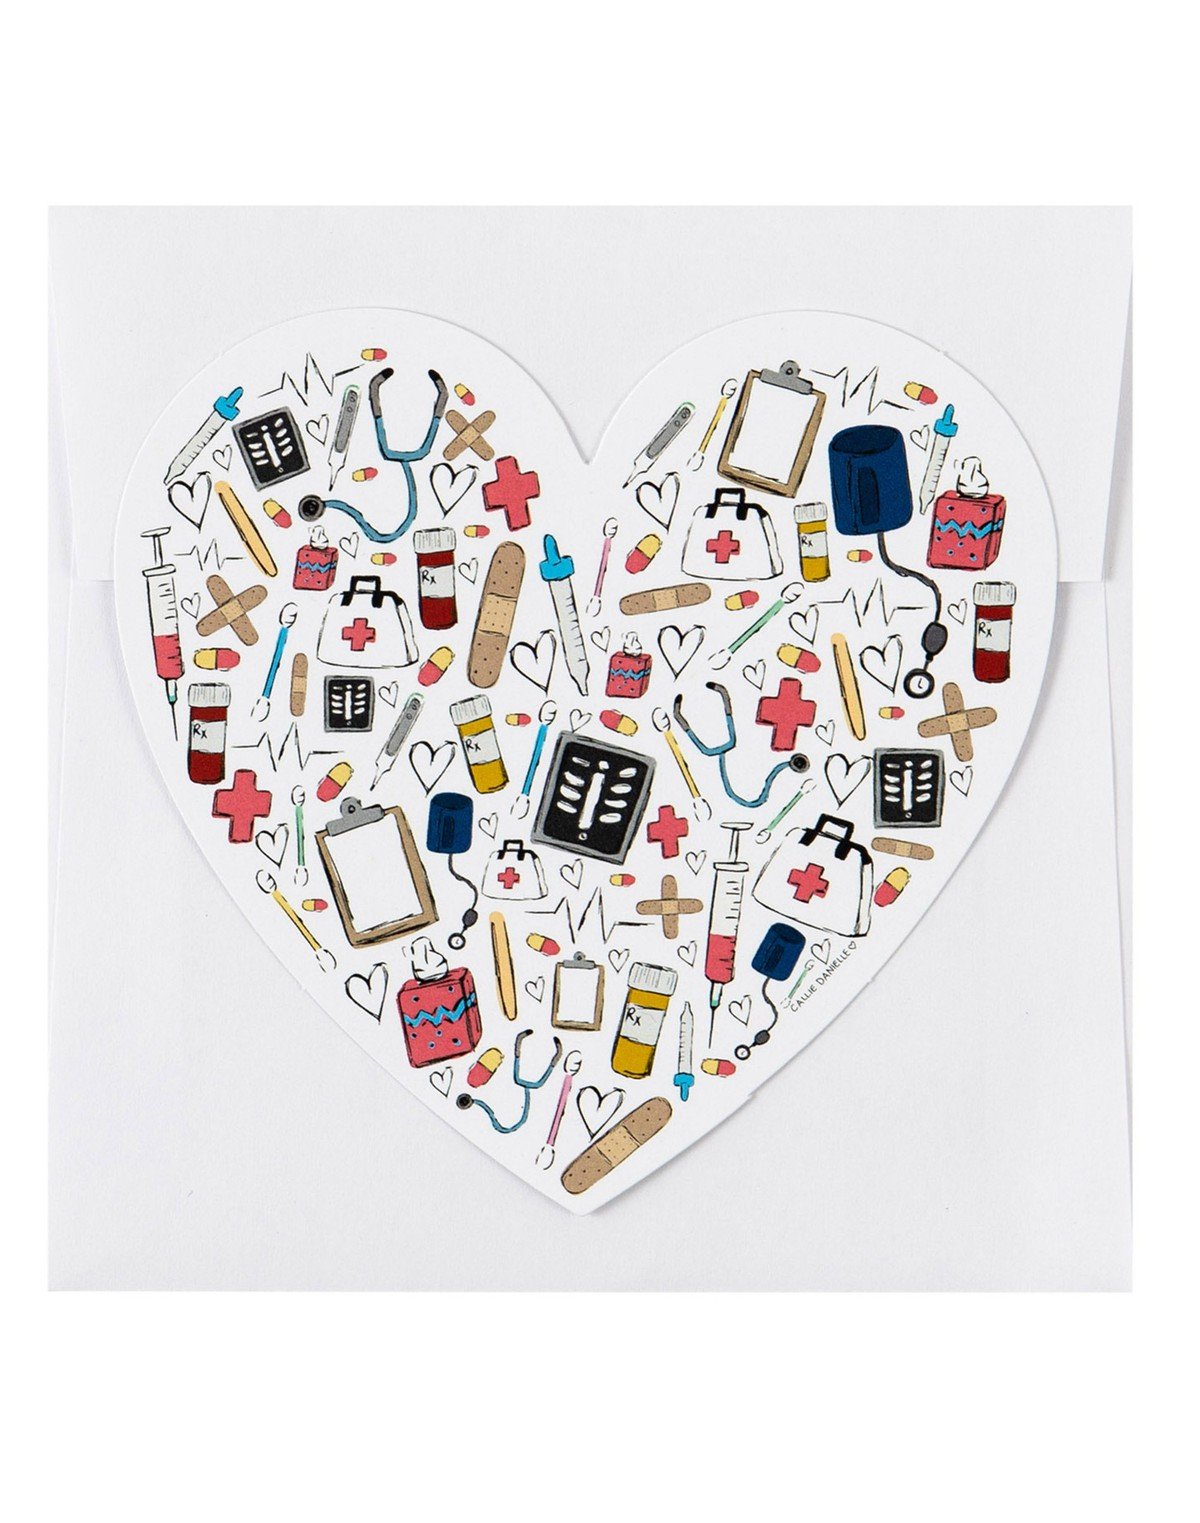 Love for Healthcare Workers Greeting Card item